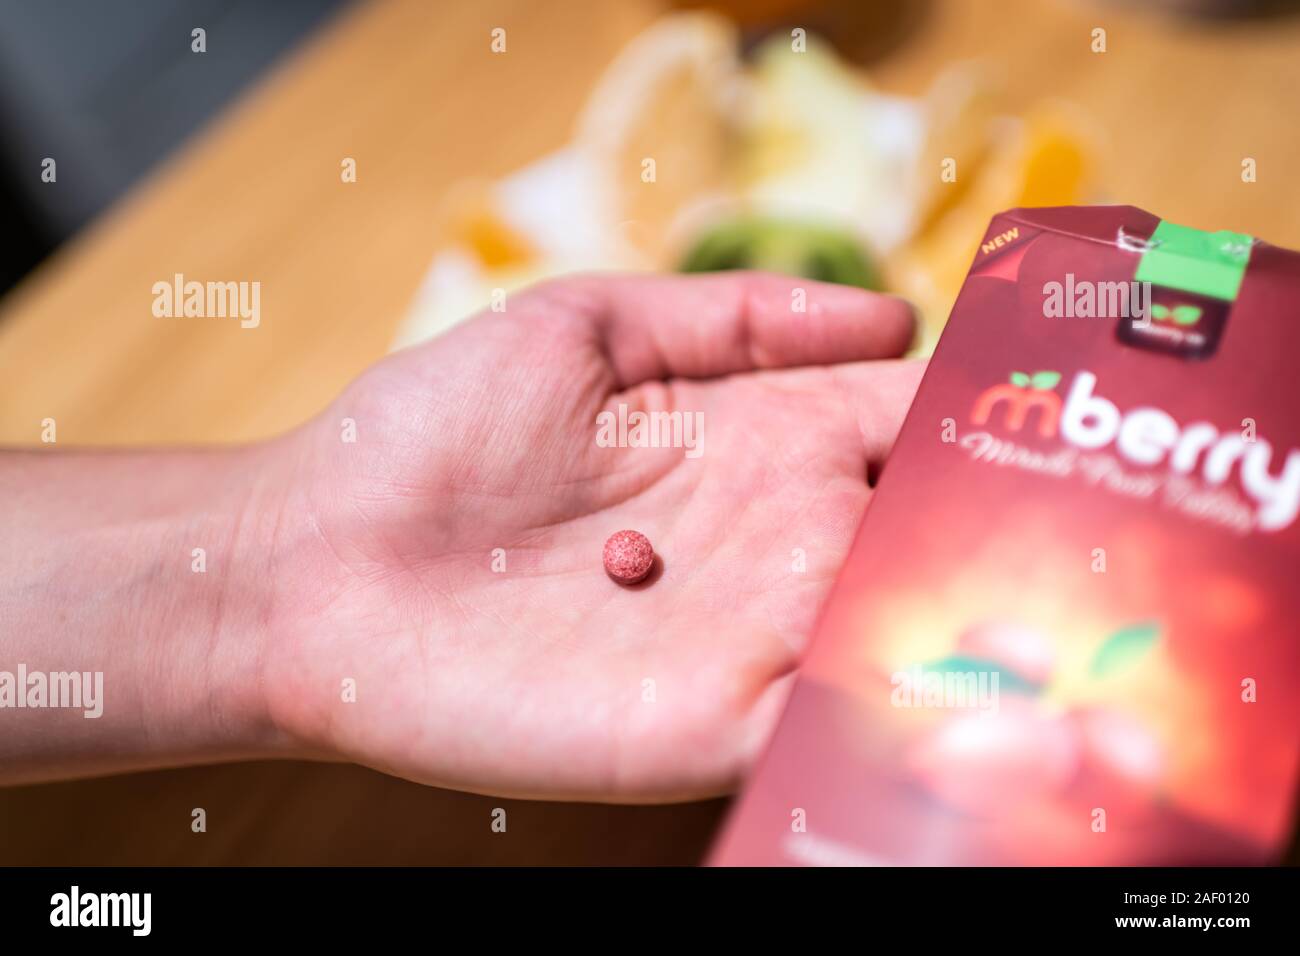 Durango, USA - September 2, 2019: Hand holding mberry miracle berry ledidi Synsepalum dulcificum berry brand tablet that turns sour foods sweet Stock Photo